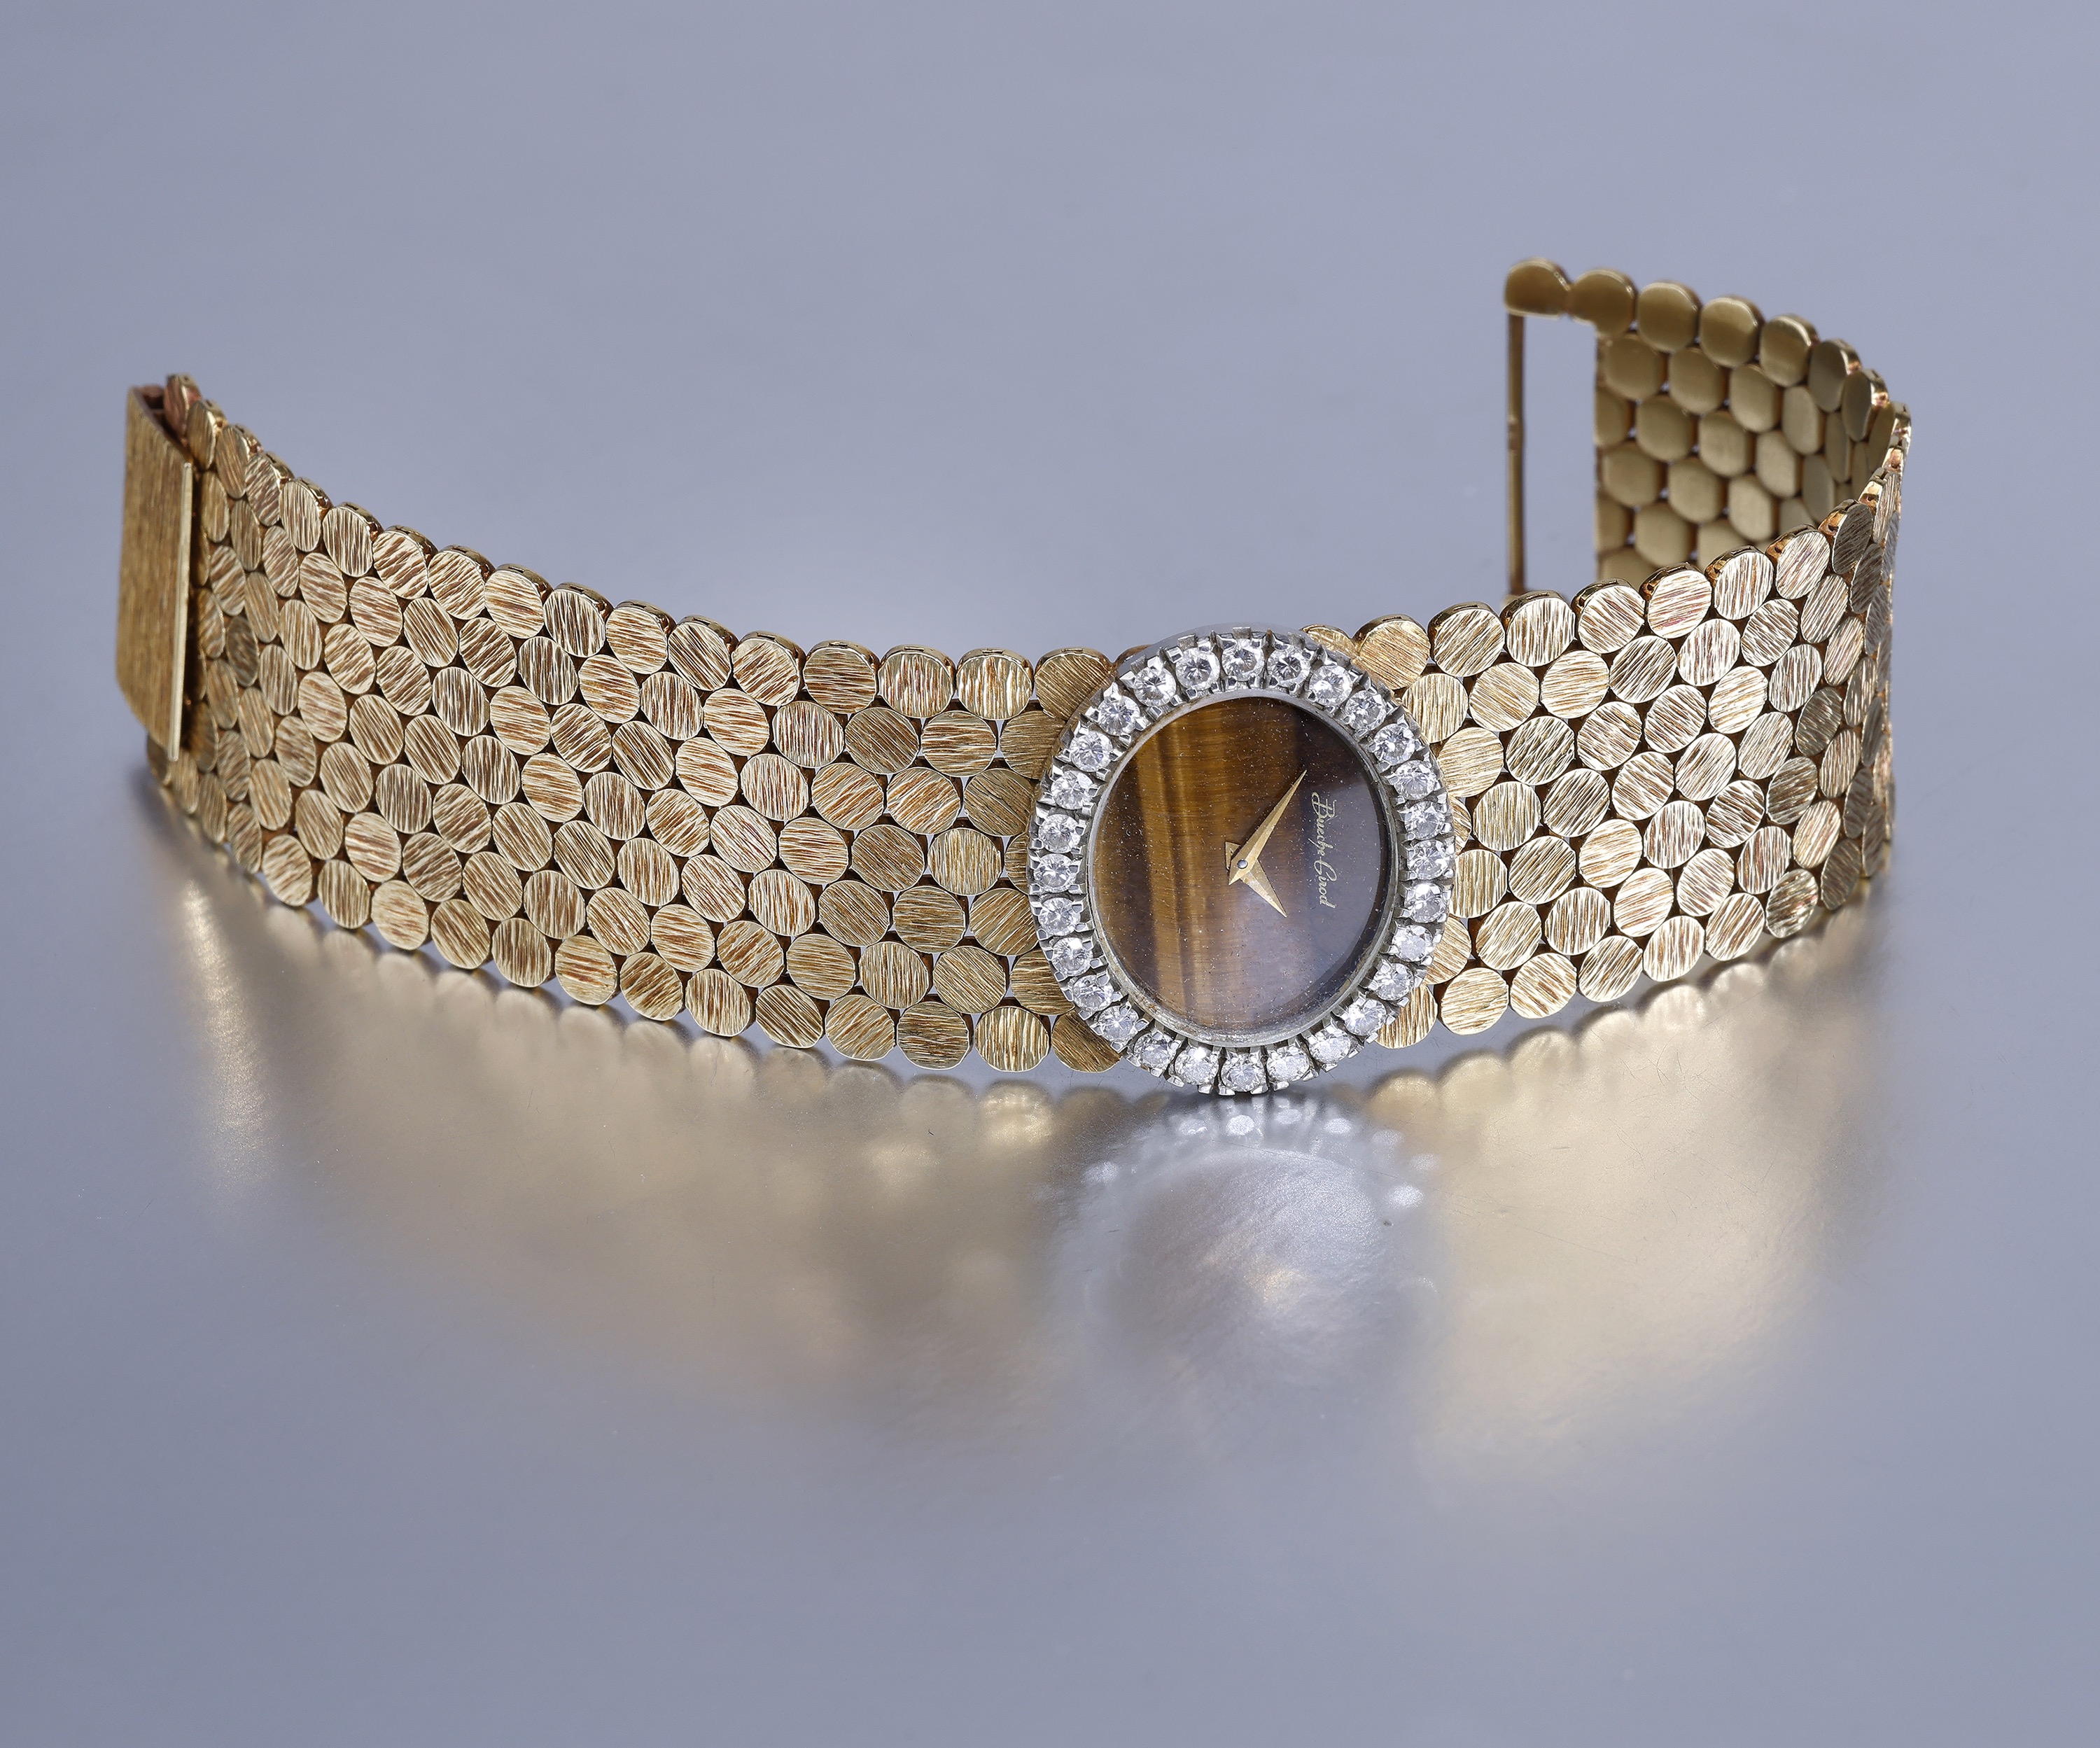 Bueche Girod. A gold and diamond-set bracelet watch with tiger's eye dial, circa 1971. Move... - Image 5 of 6